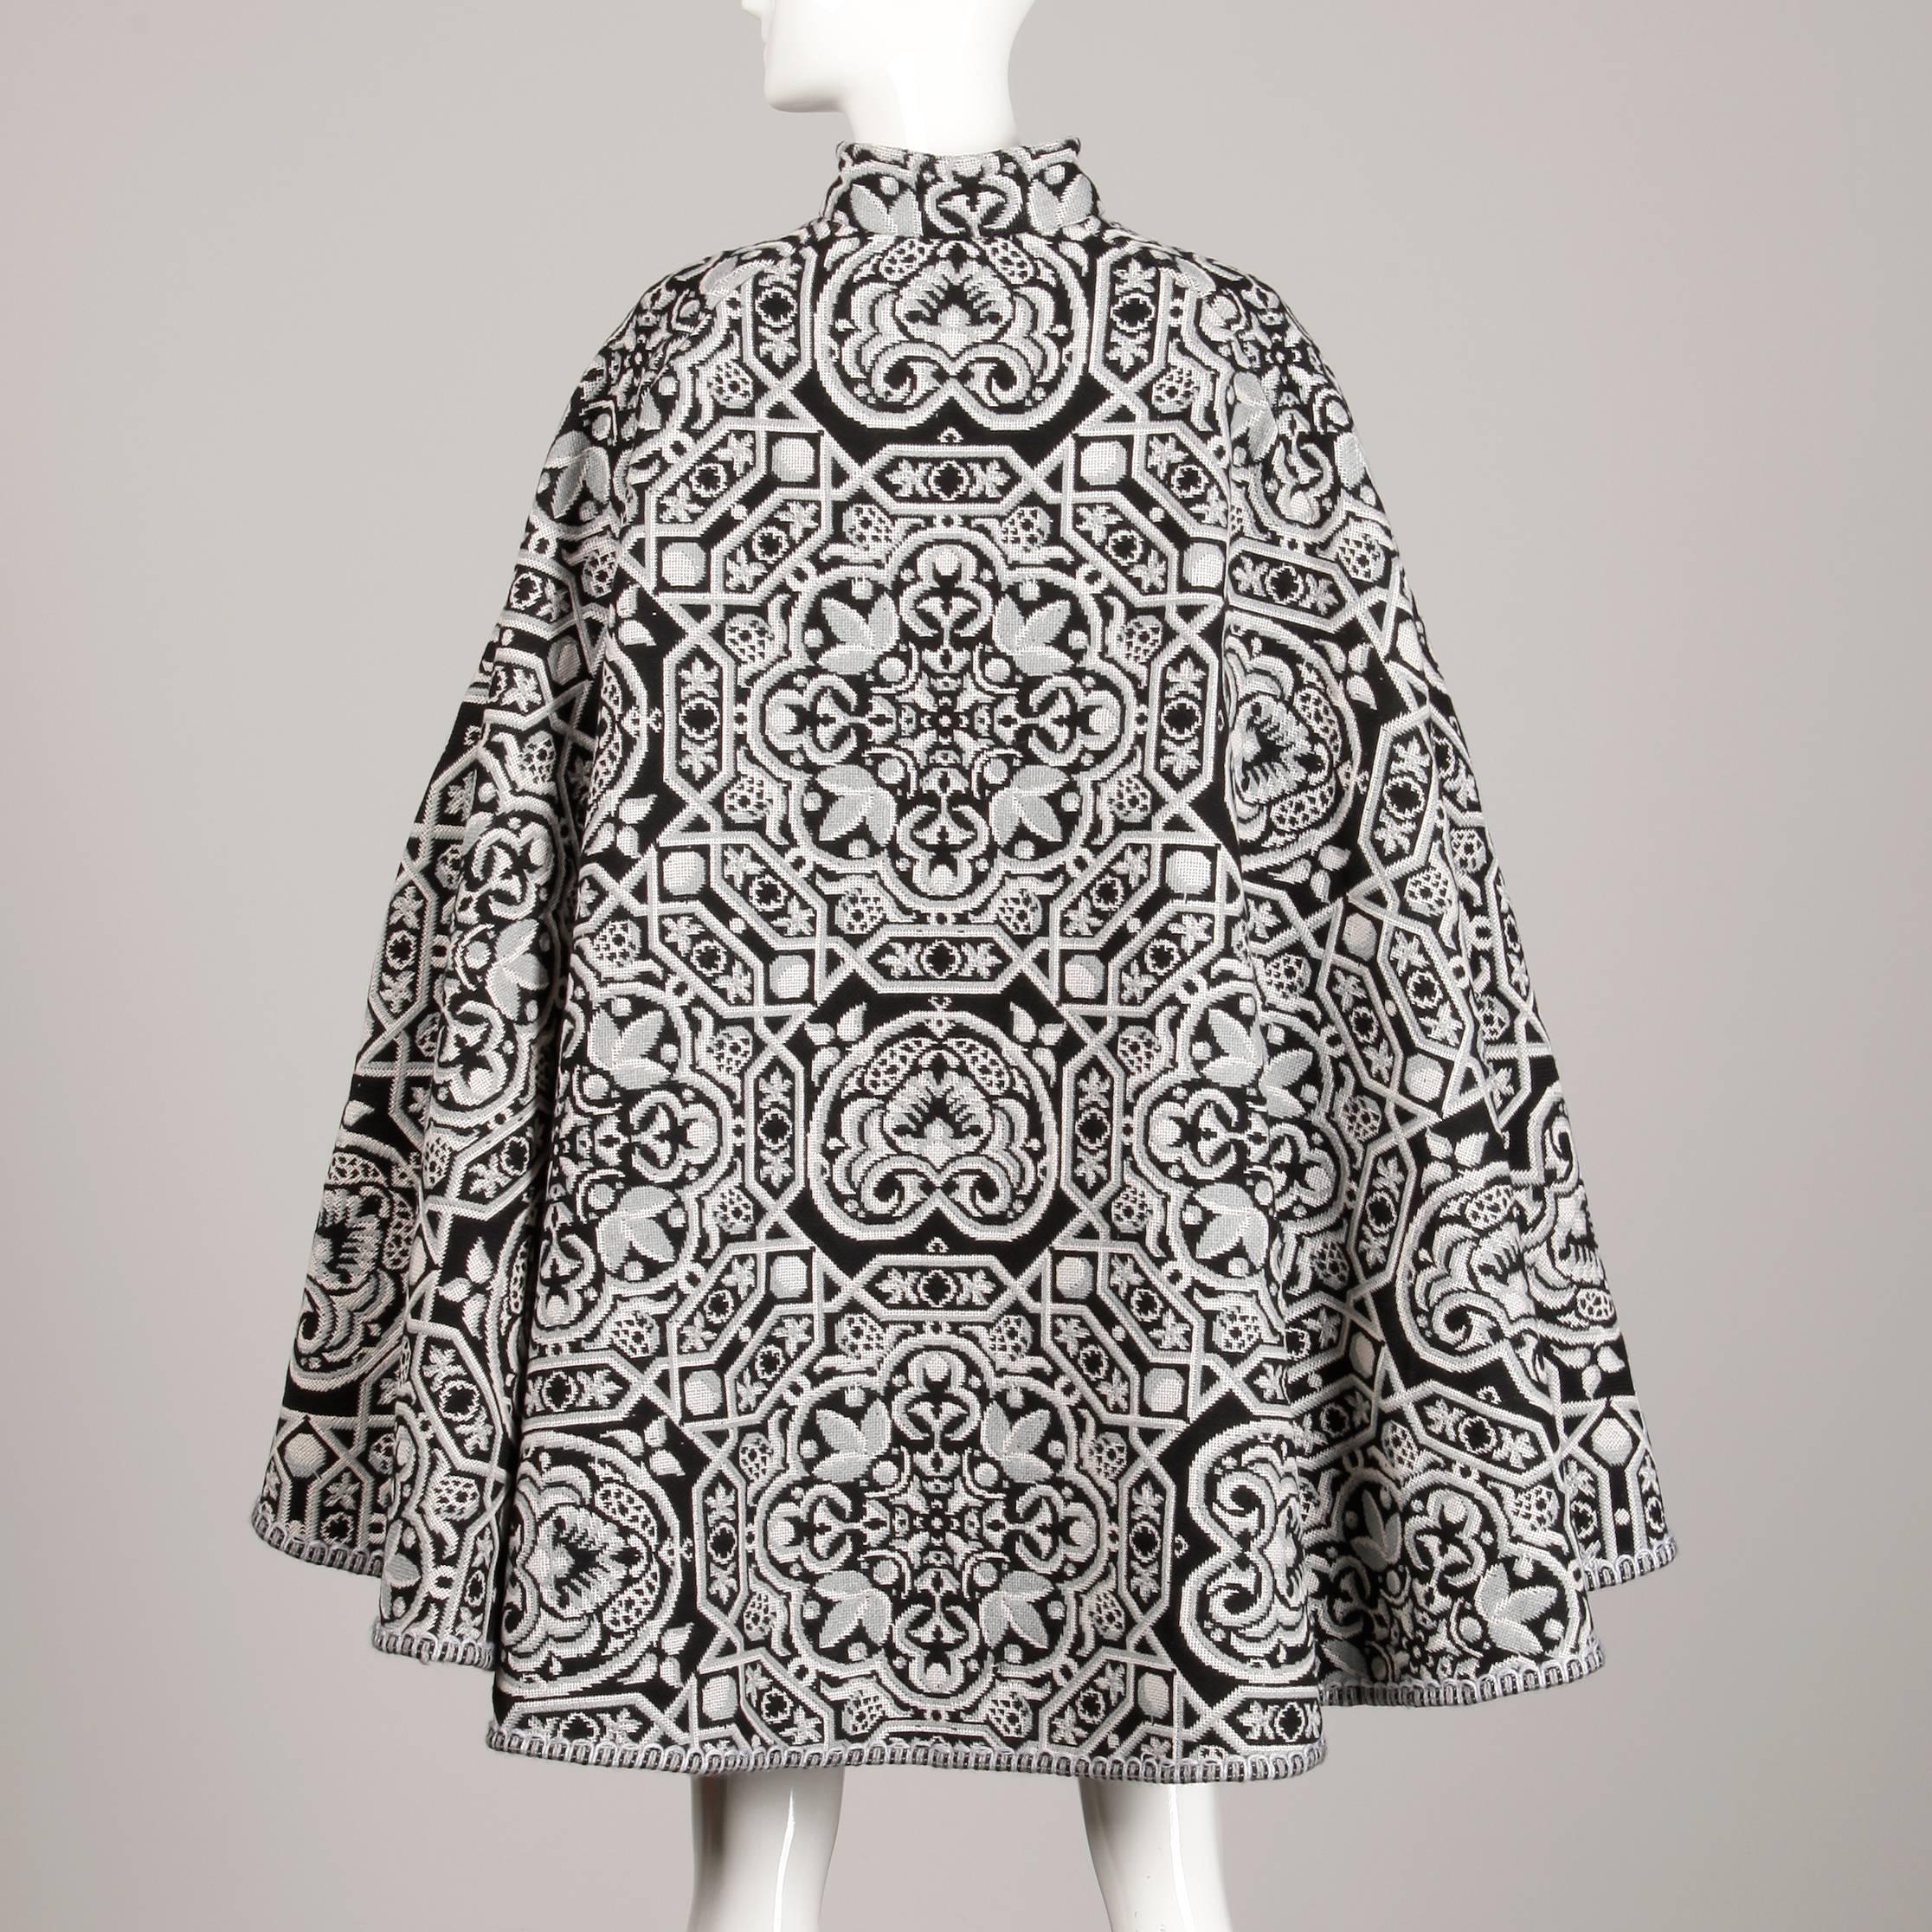 Incredible Spanish-made vintage tapestry cape coat in a black, white and gray weave. Unlined with front tie closure. Free size. The total length measures 37.5